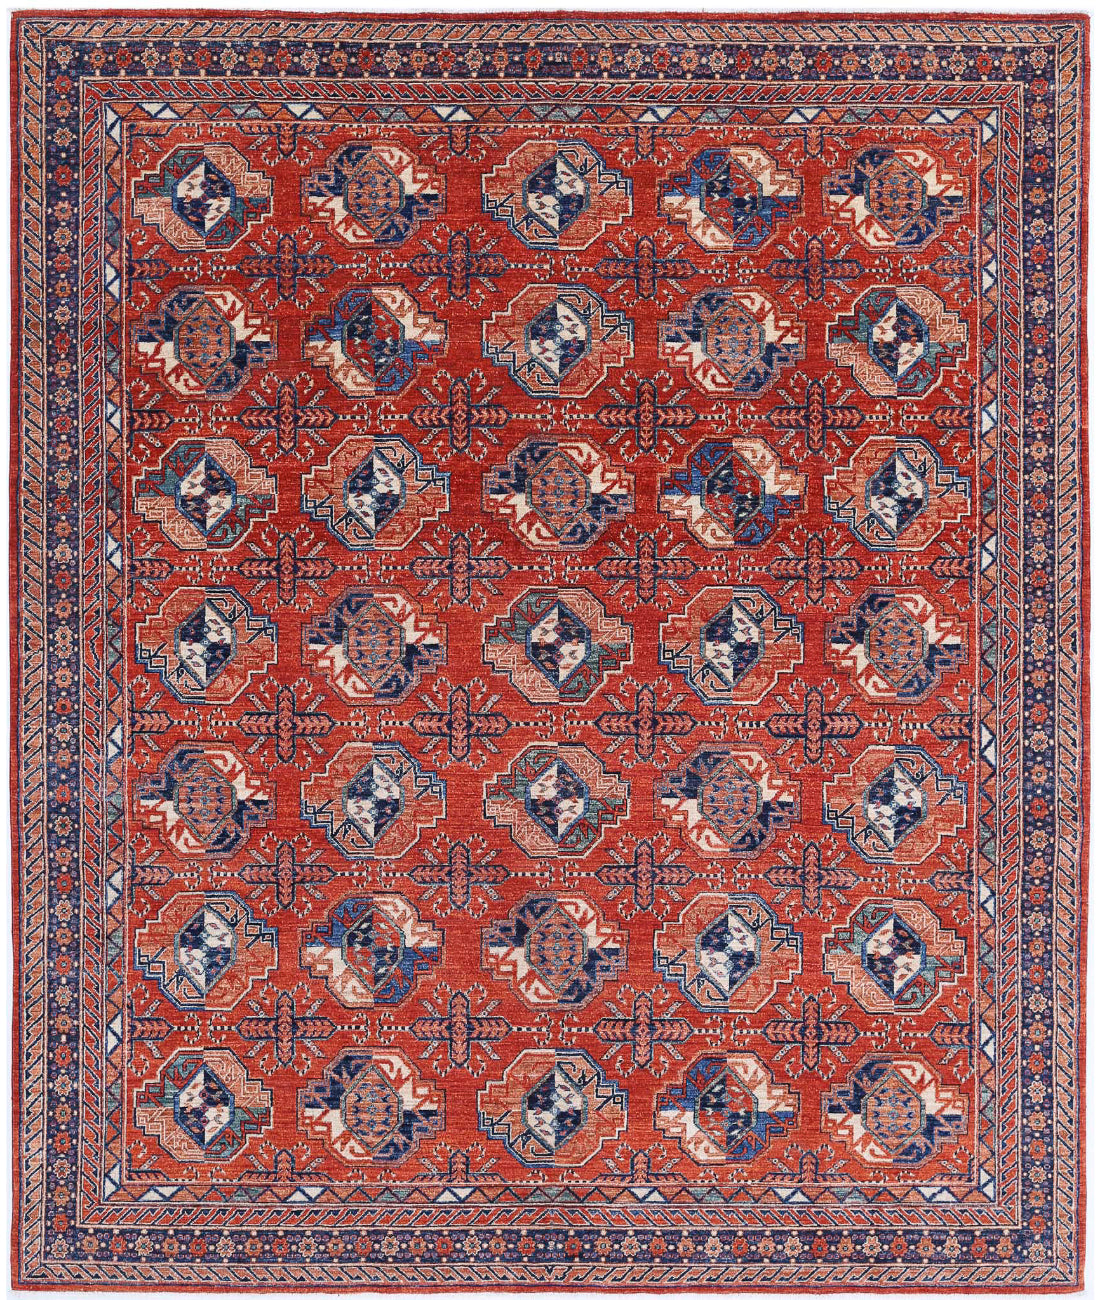 Hand Knotted Nomadic Caucasian Humna Wool Rug - 8'2'' x 9'9'' 8'2'' x 9'9'' (245 X 293) / Rust / Blue